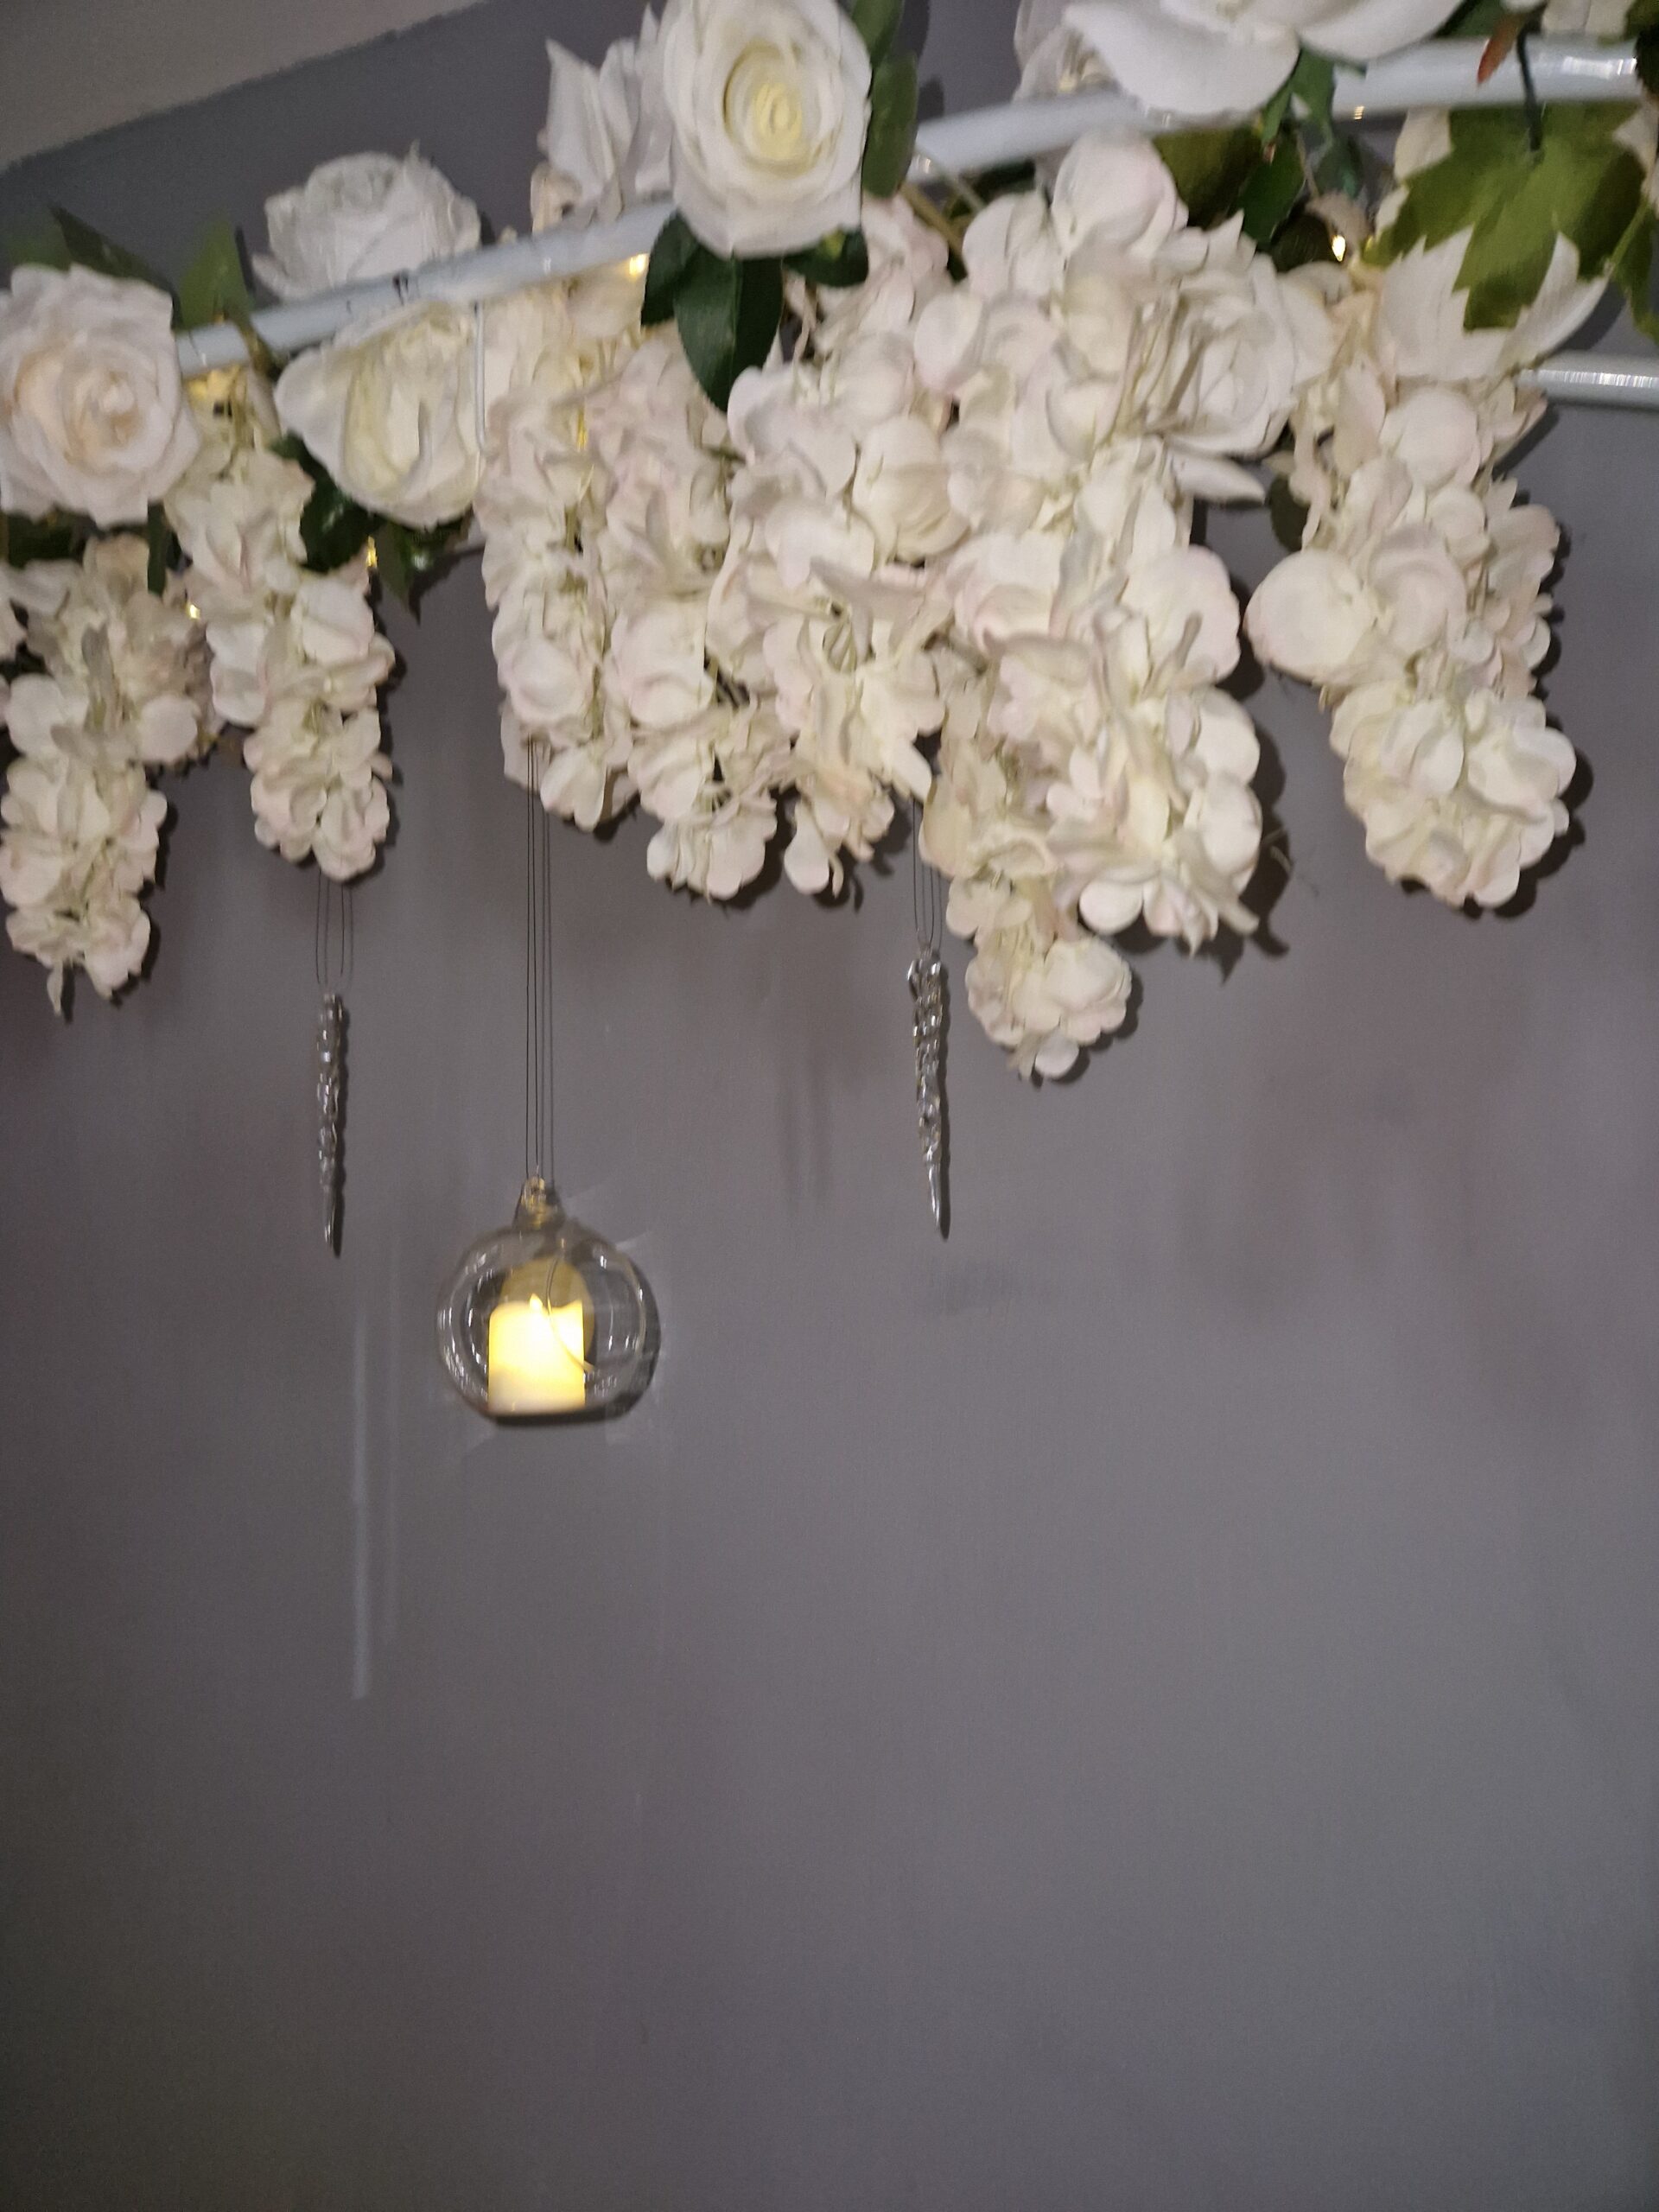 White flower garlands hanging from the winter wedding arch